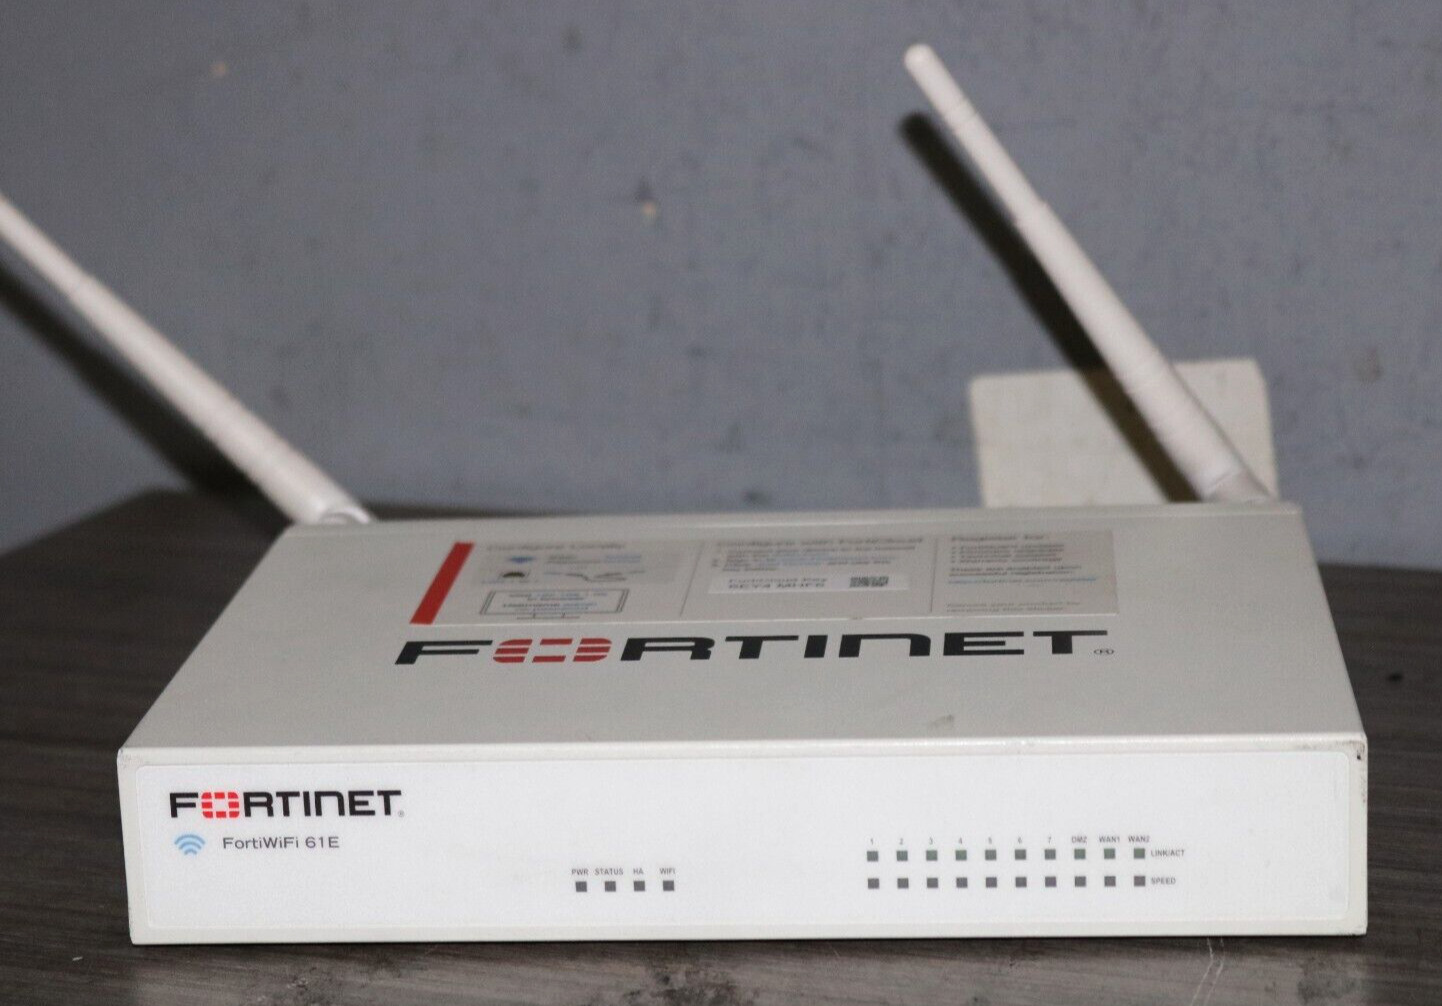 Fortinet FG-61E FWF-61E FortiGate Network Security Firewall , USED .